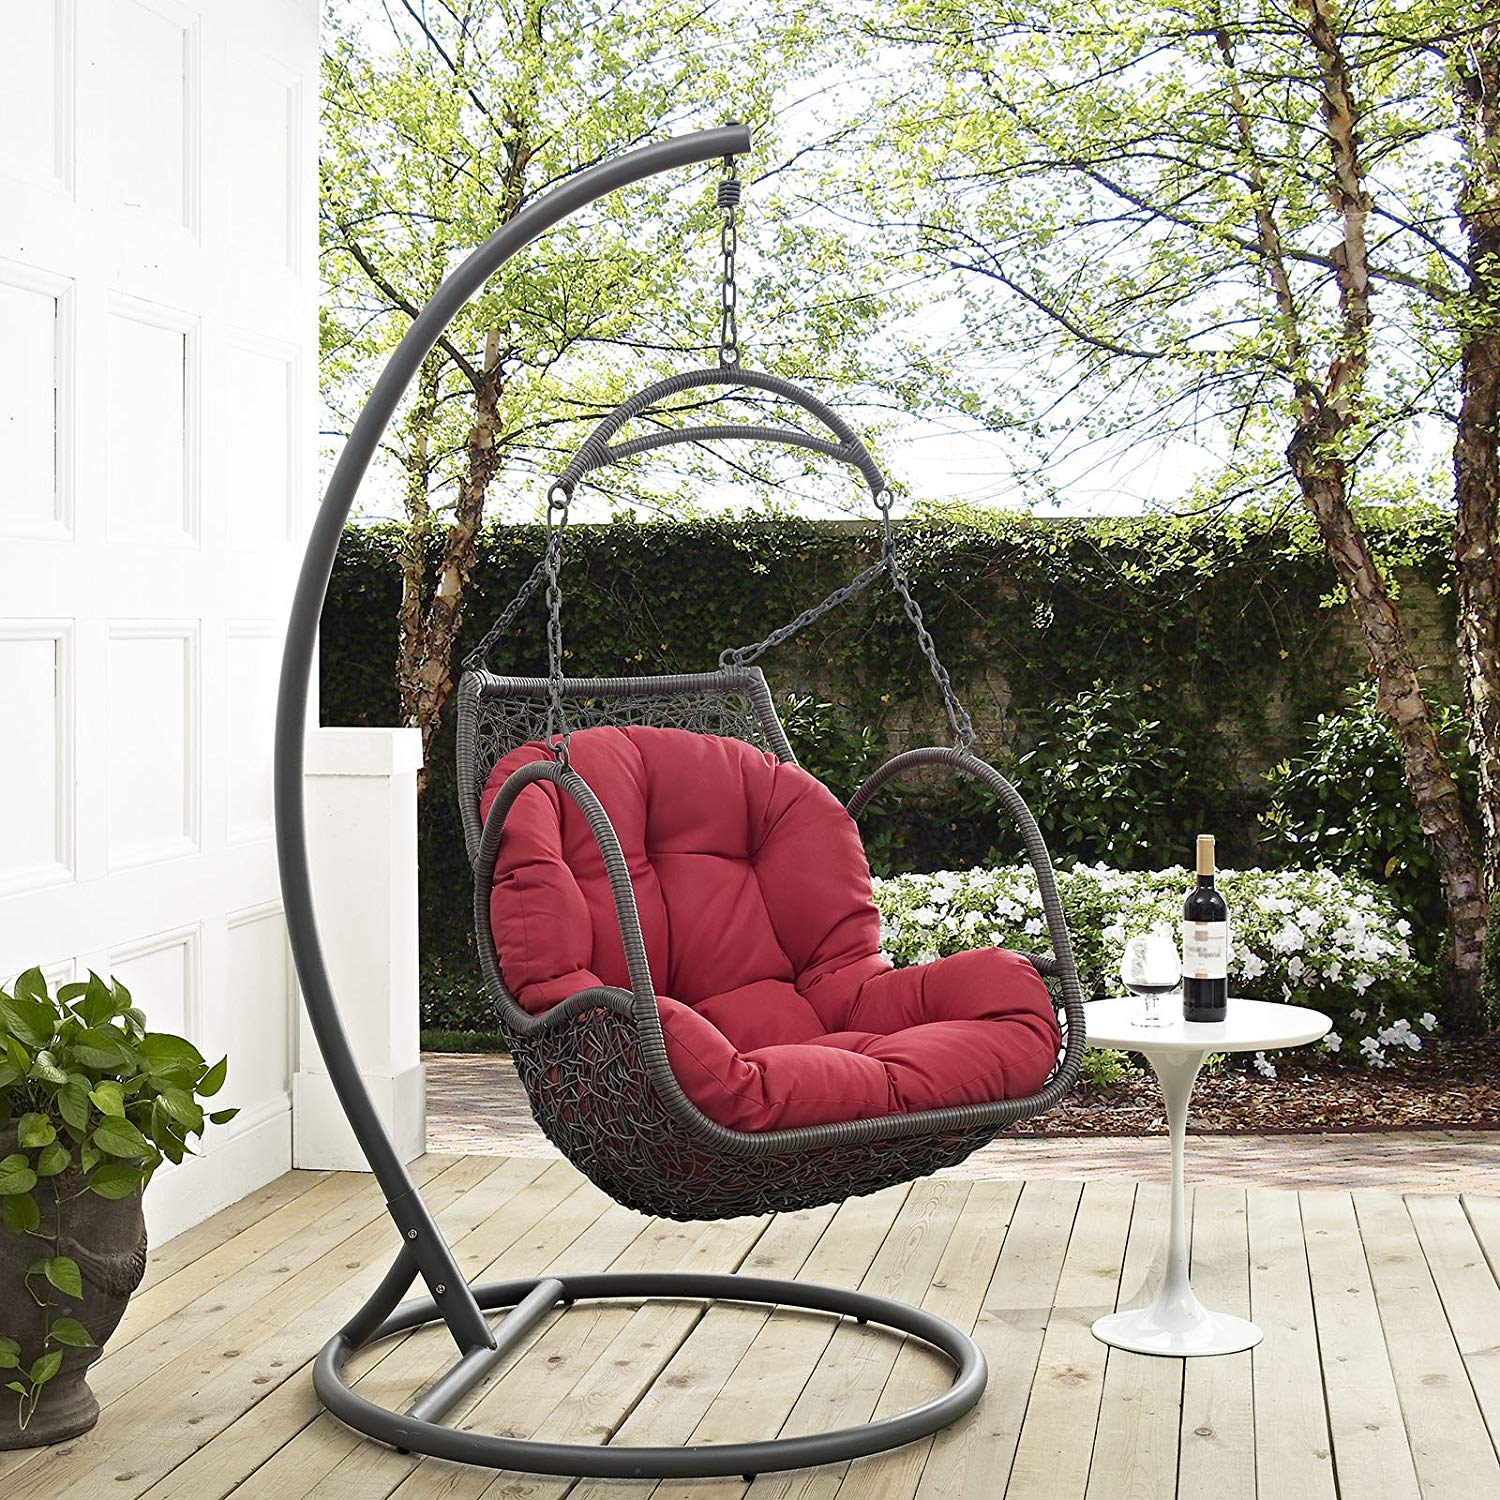 Unique Swing Chair Outdoor Online India for Small Space